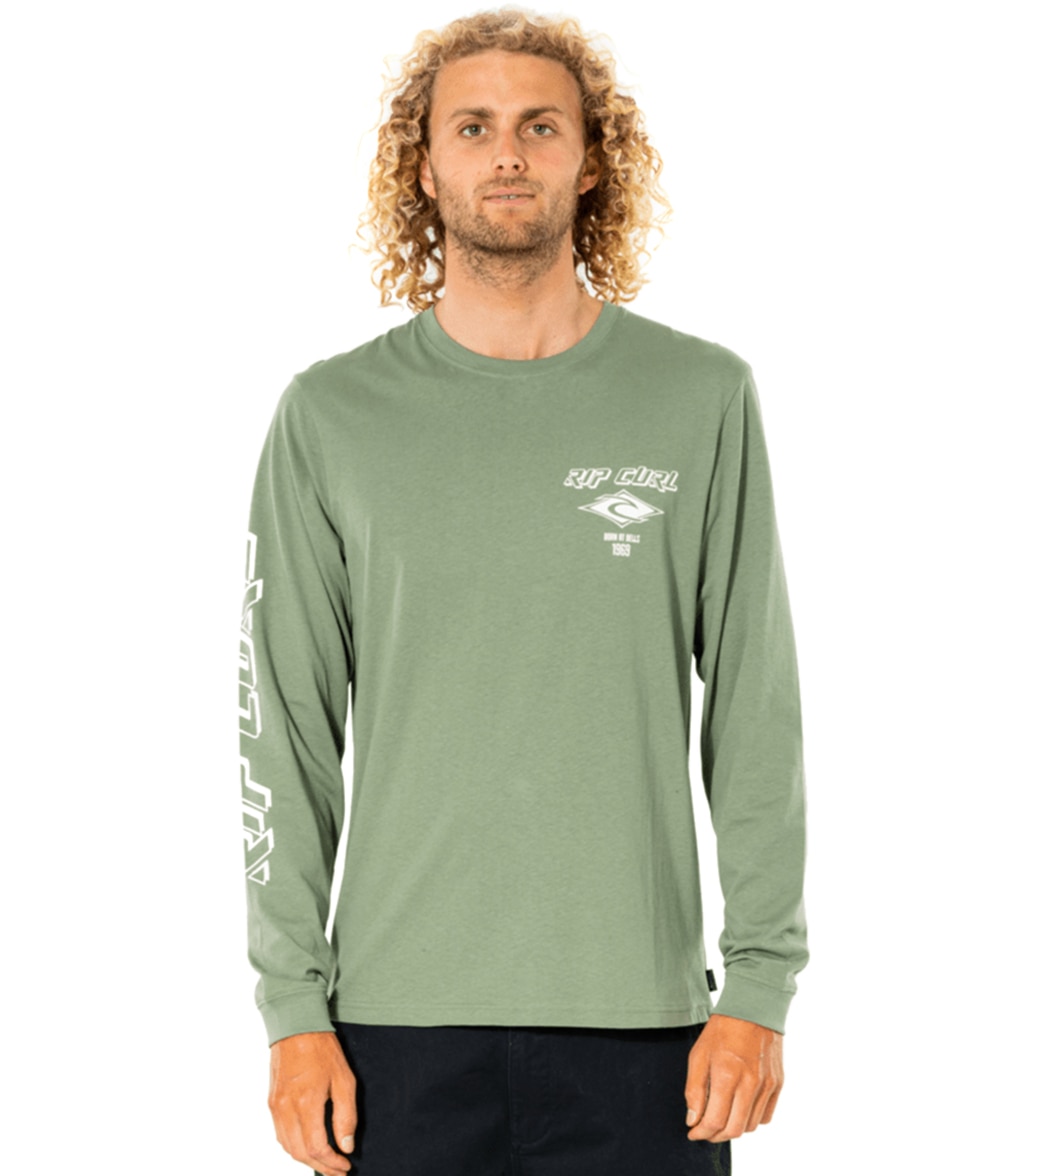 Rip Curl Men's Fade Out Icon Long Sleeve Tee Shirt - Washed Clover Xl Cotton - Swimoutlet.com